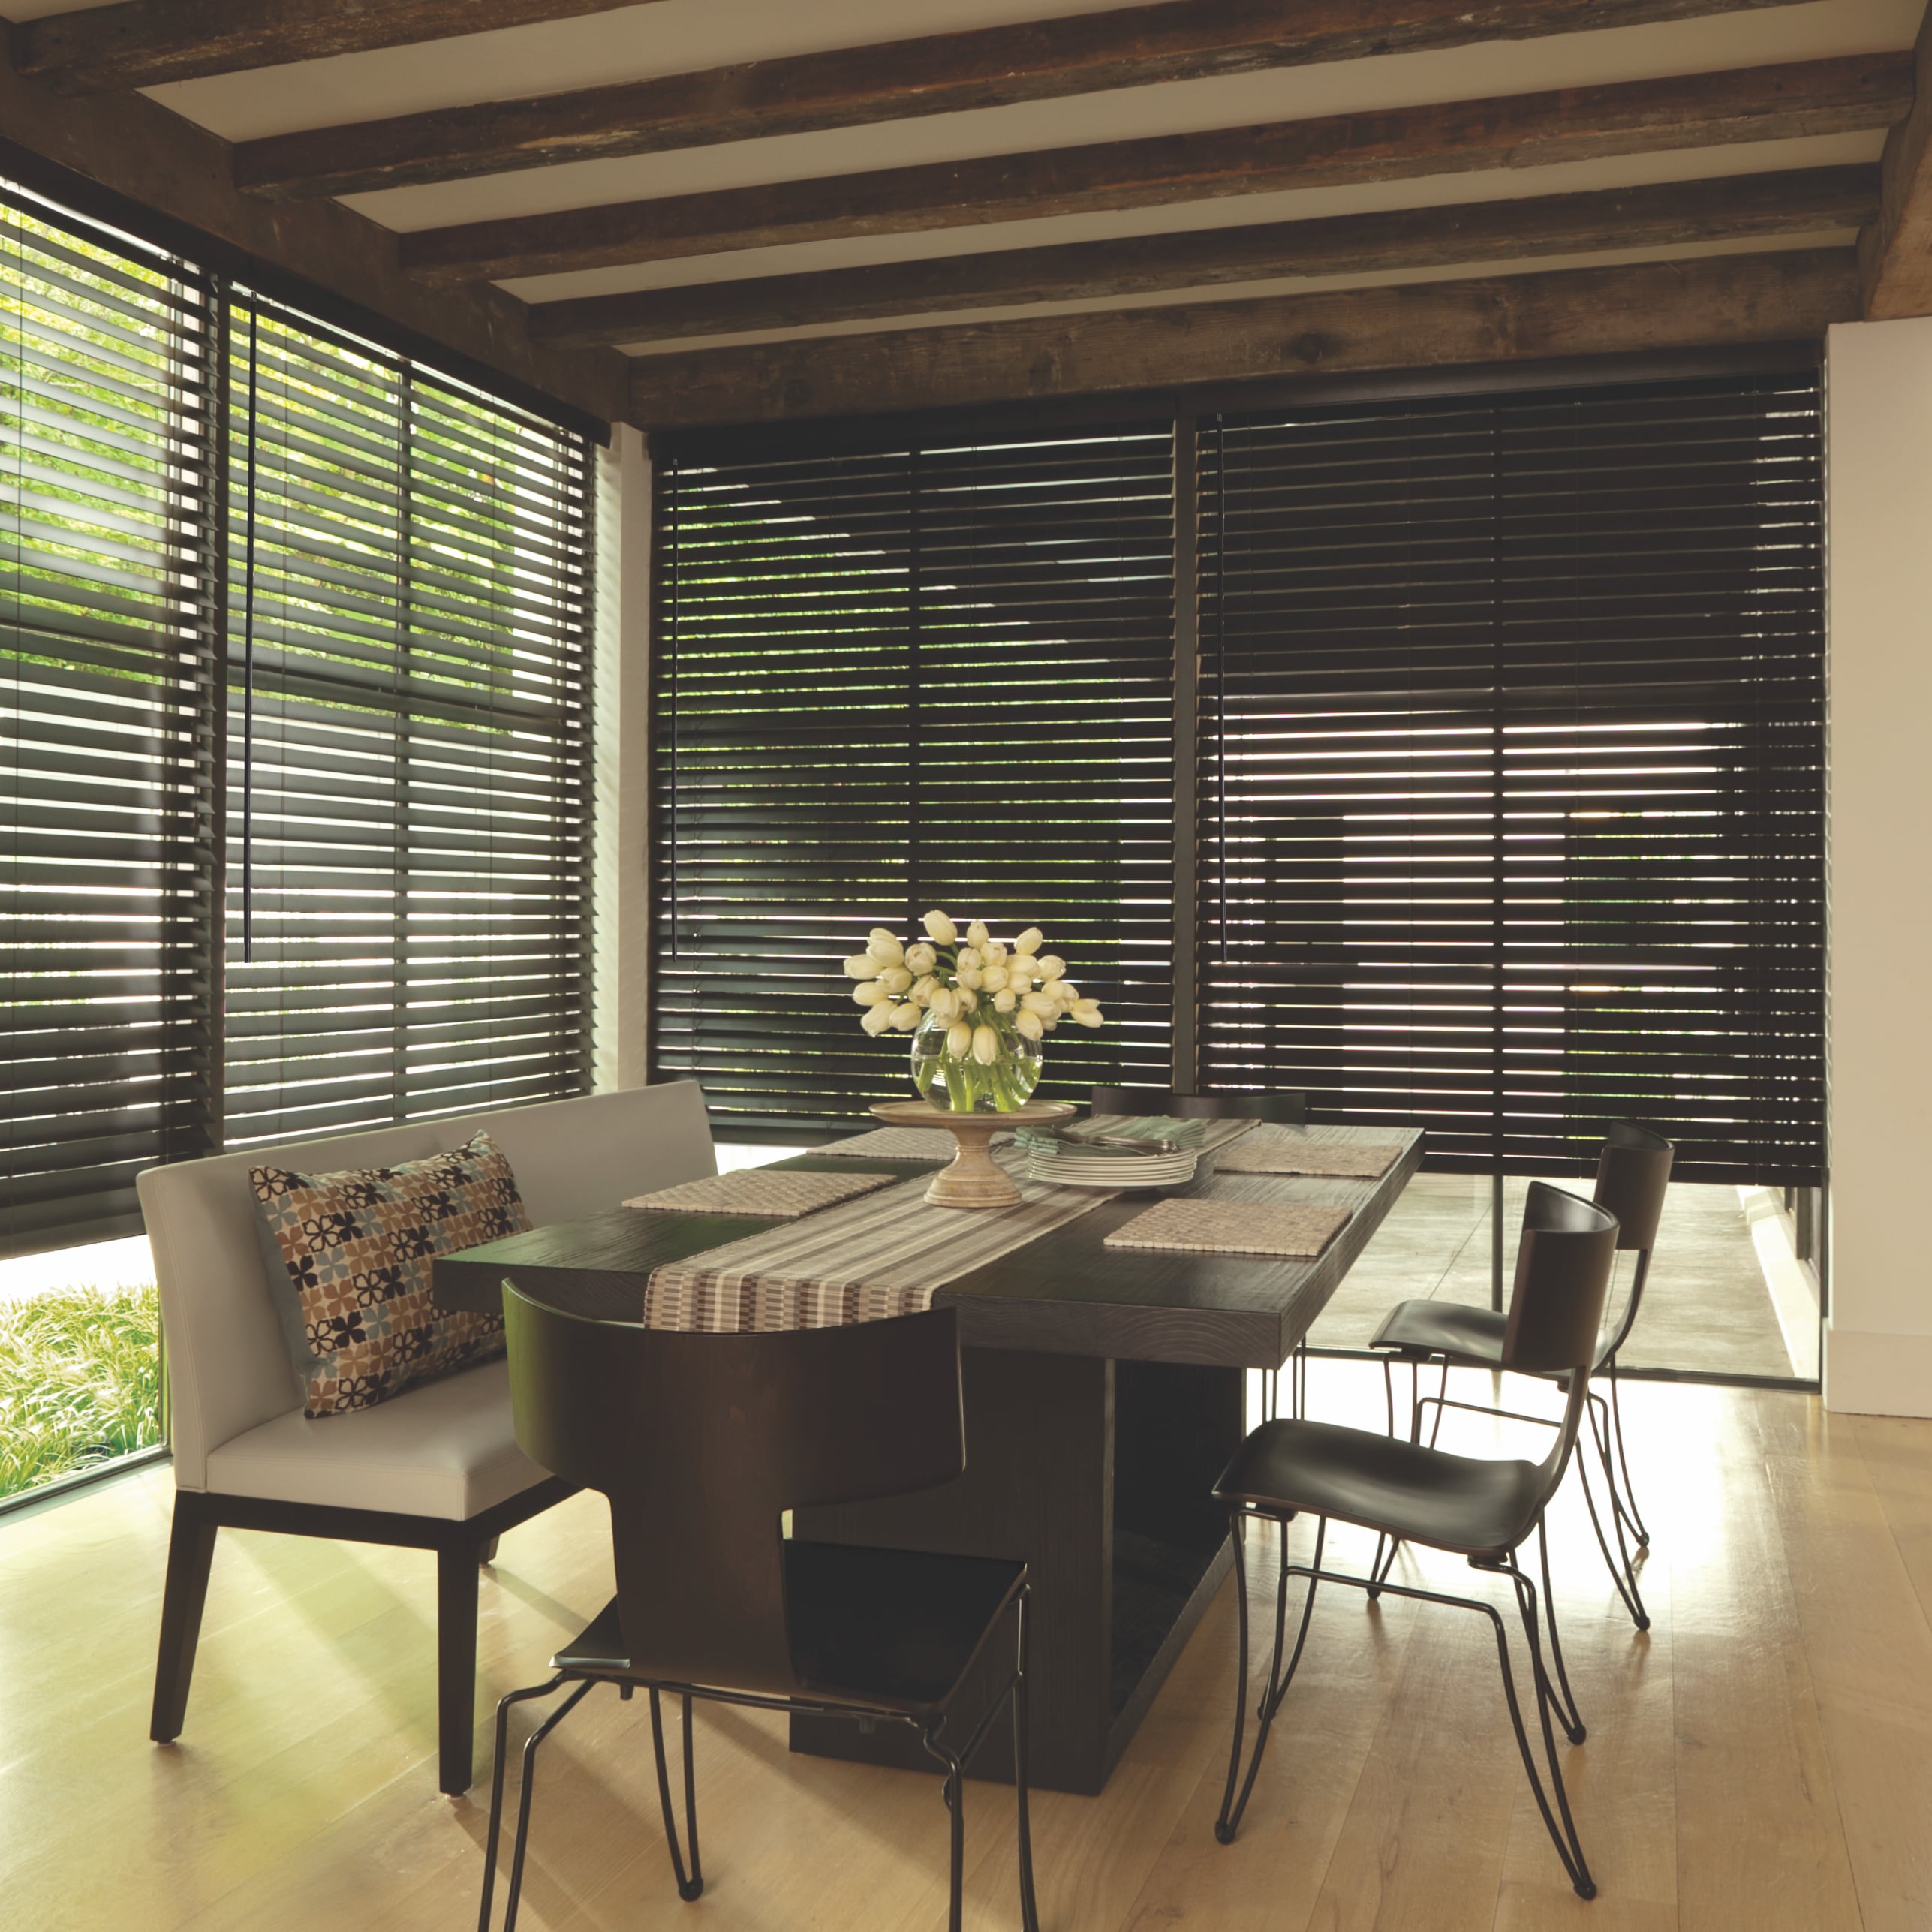 Blinds in a dining room